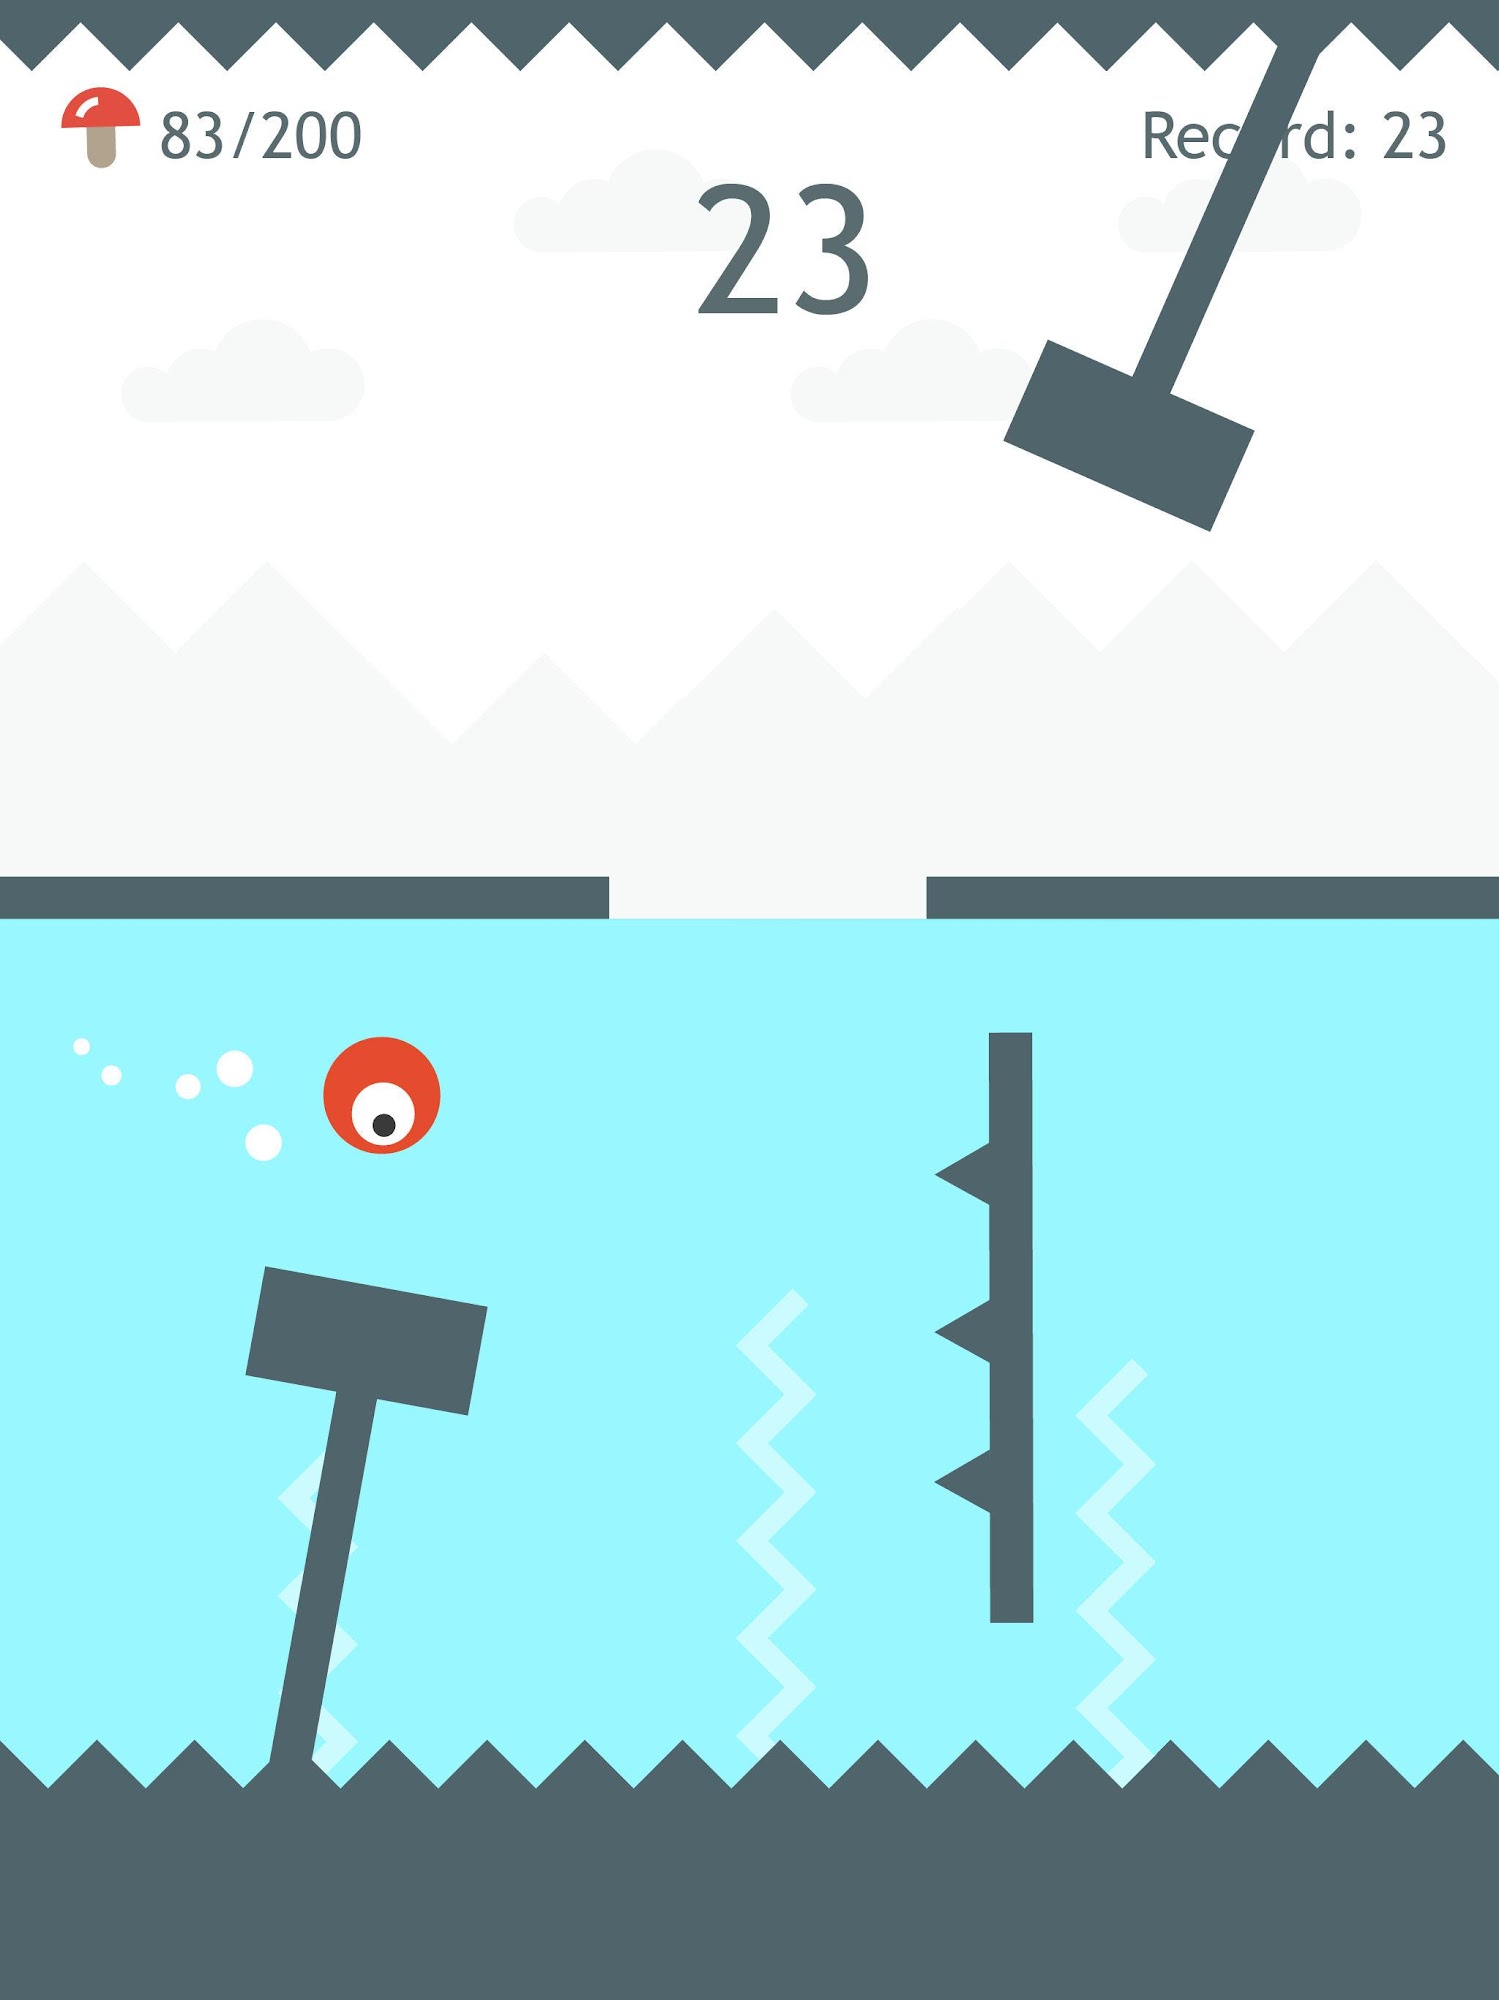 Gameplay of the Hop Hop Hop Underwater for Android phone or tablet.